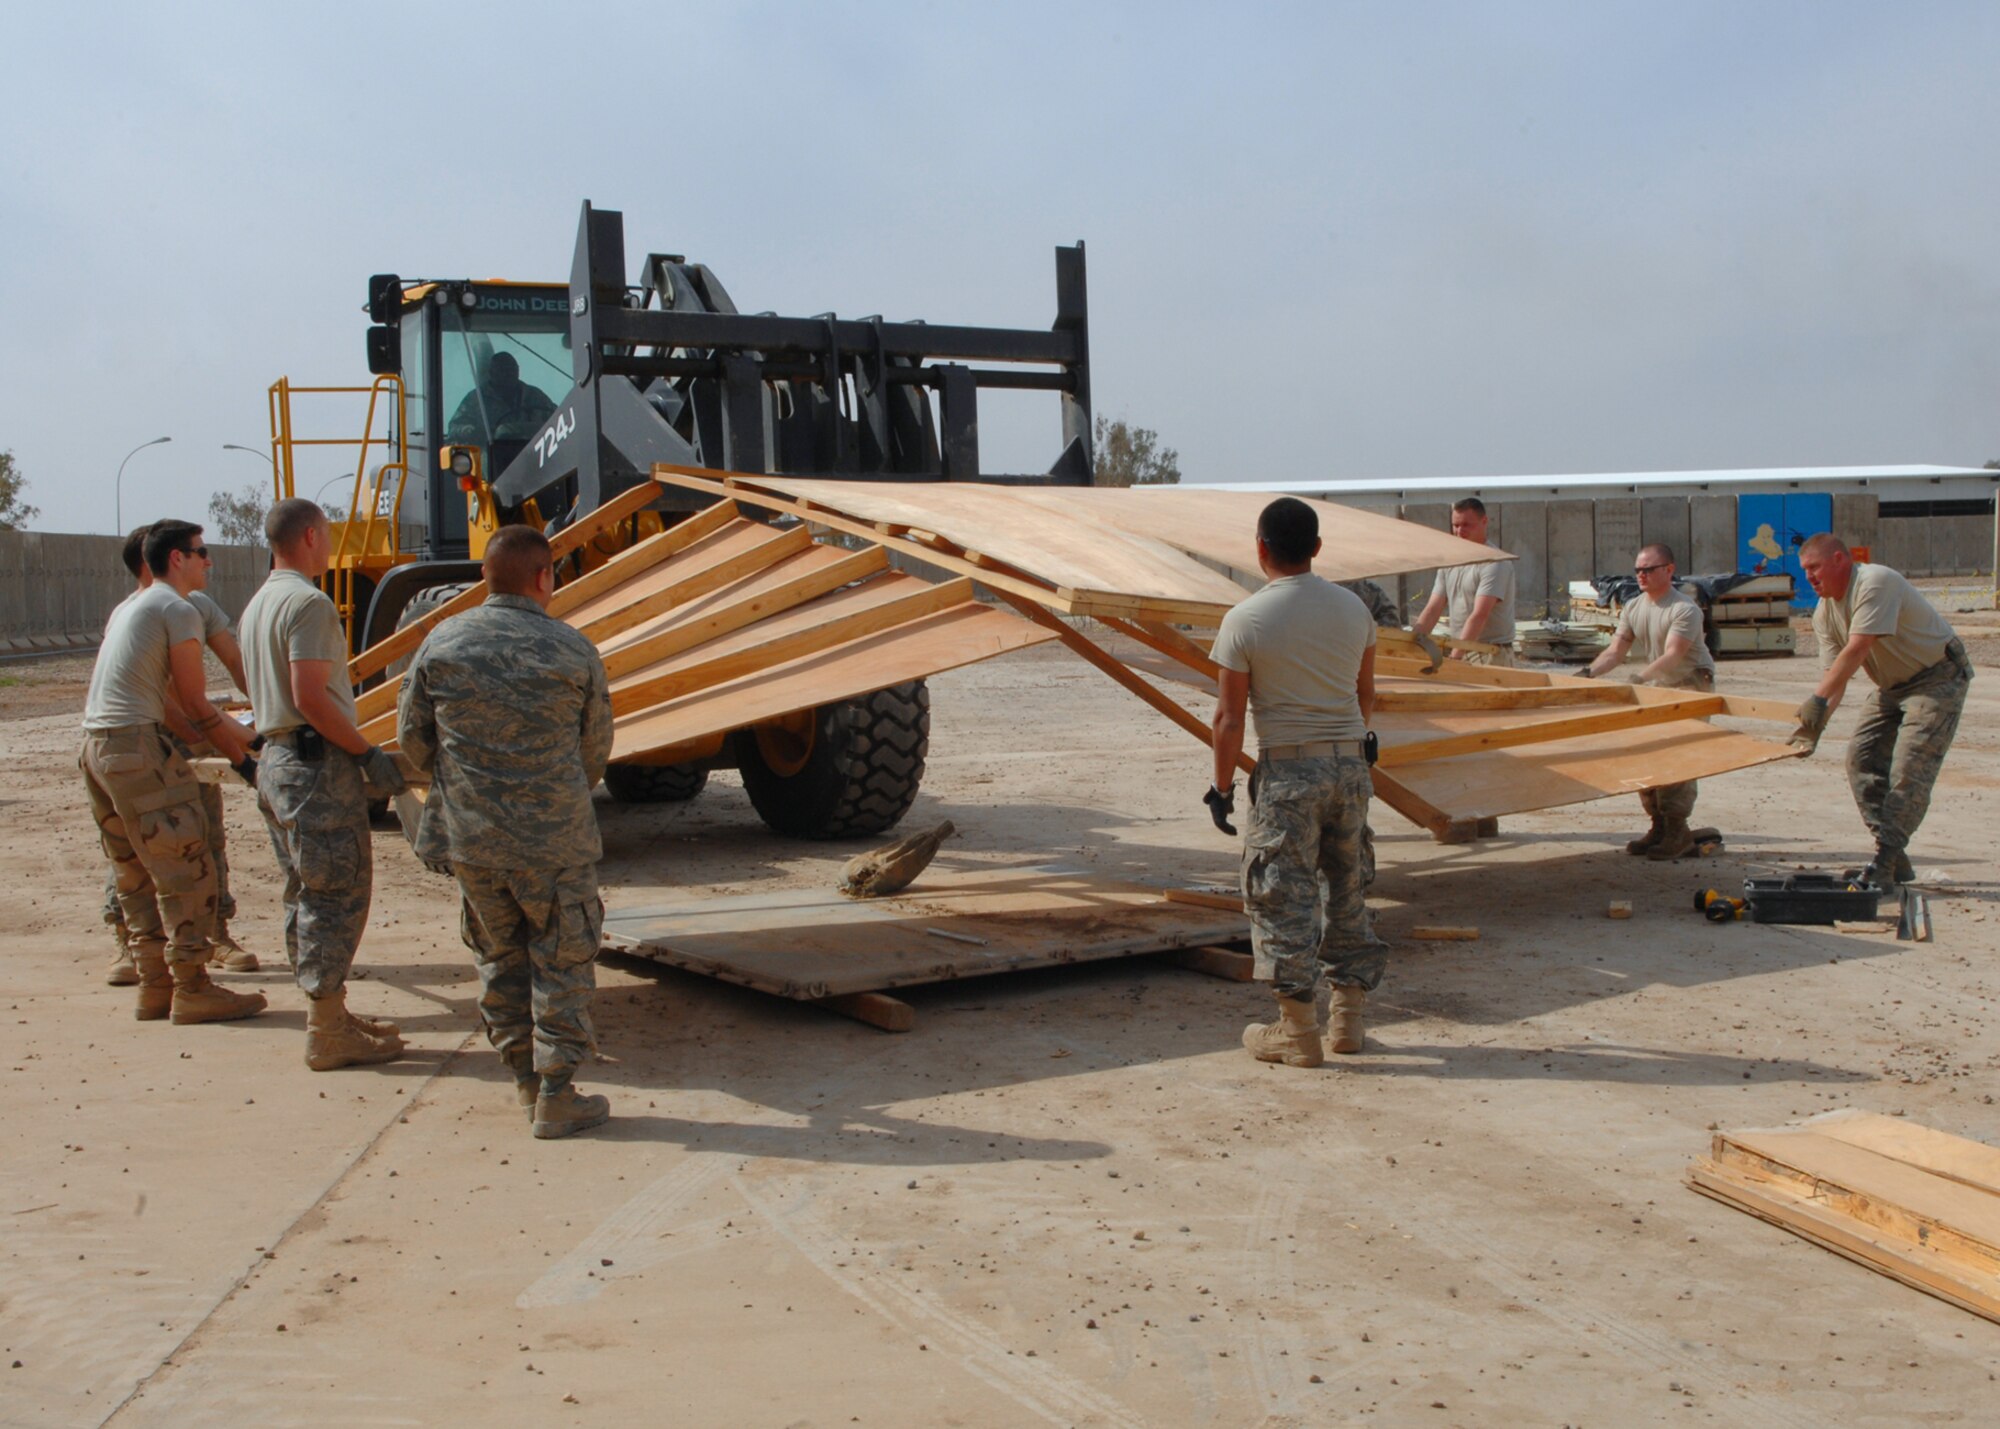 BALAD AIR BASE, Iraq -- Members of the 332nd Expeditionary Civil Engineer Squadron pull apart the entry way of the old Air Force Theater Hospital emergency room tent that will be shipped to the National Museum of Health and Medicine in Washington, D.C., here, Feb. 29. The tent is slated for exhibition because it is known, by the medical community, as the place where the most American blood was spilled since the Vietnam War. (U.S. Air Force photo/ Senior Airman Julianne Showalter)